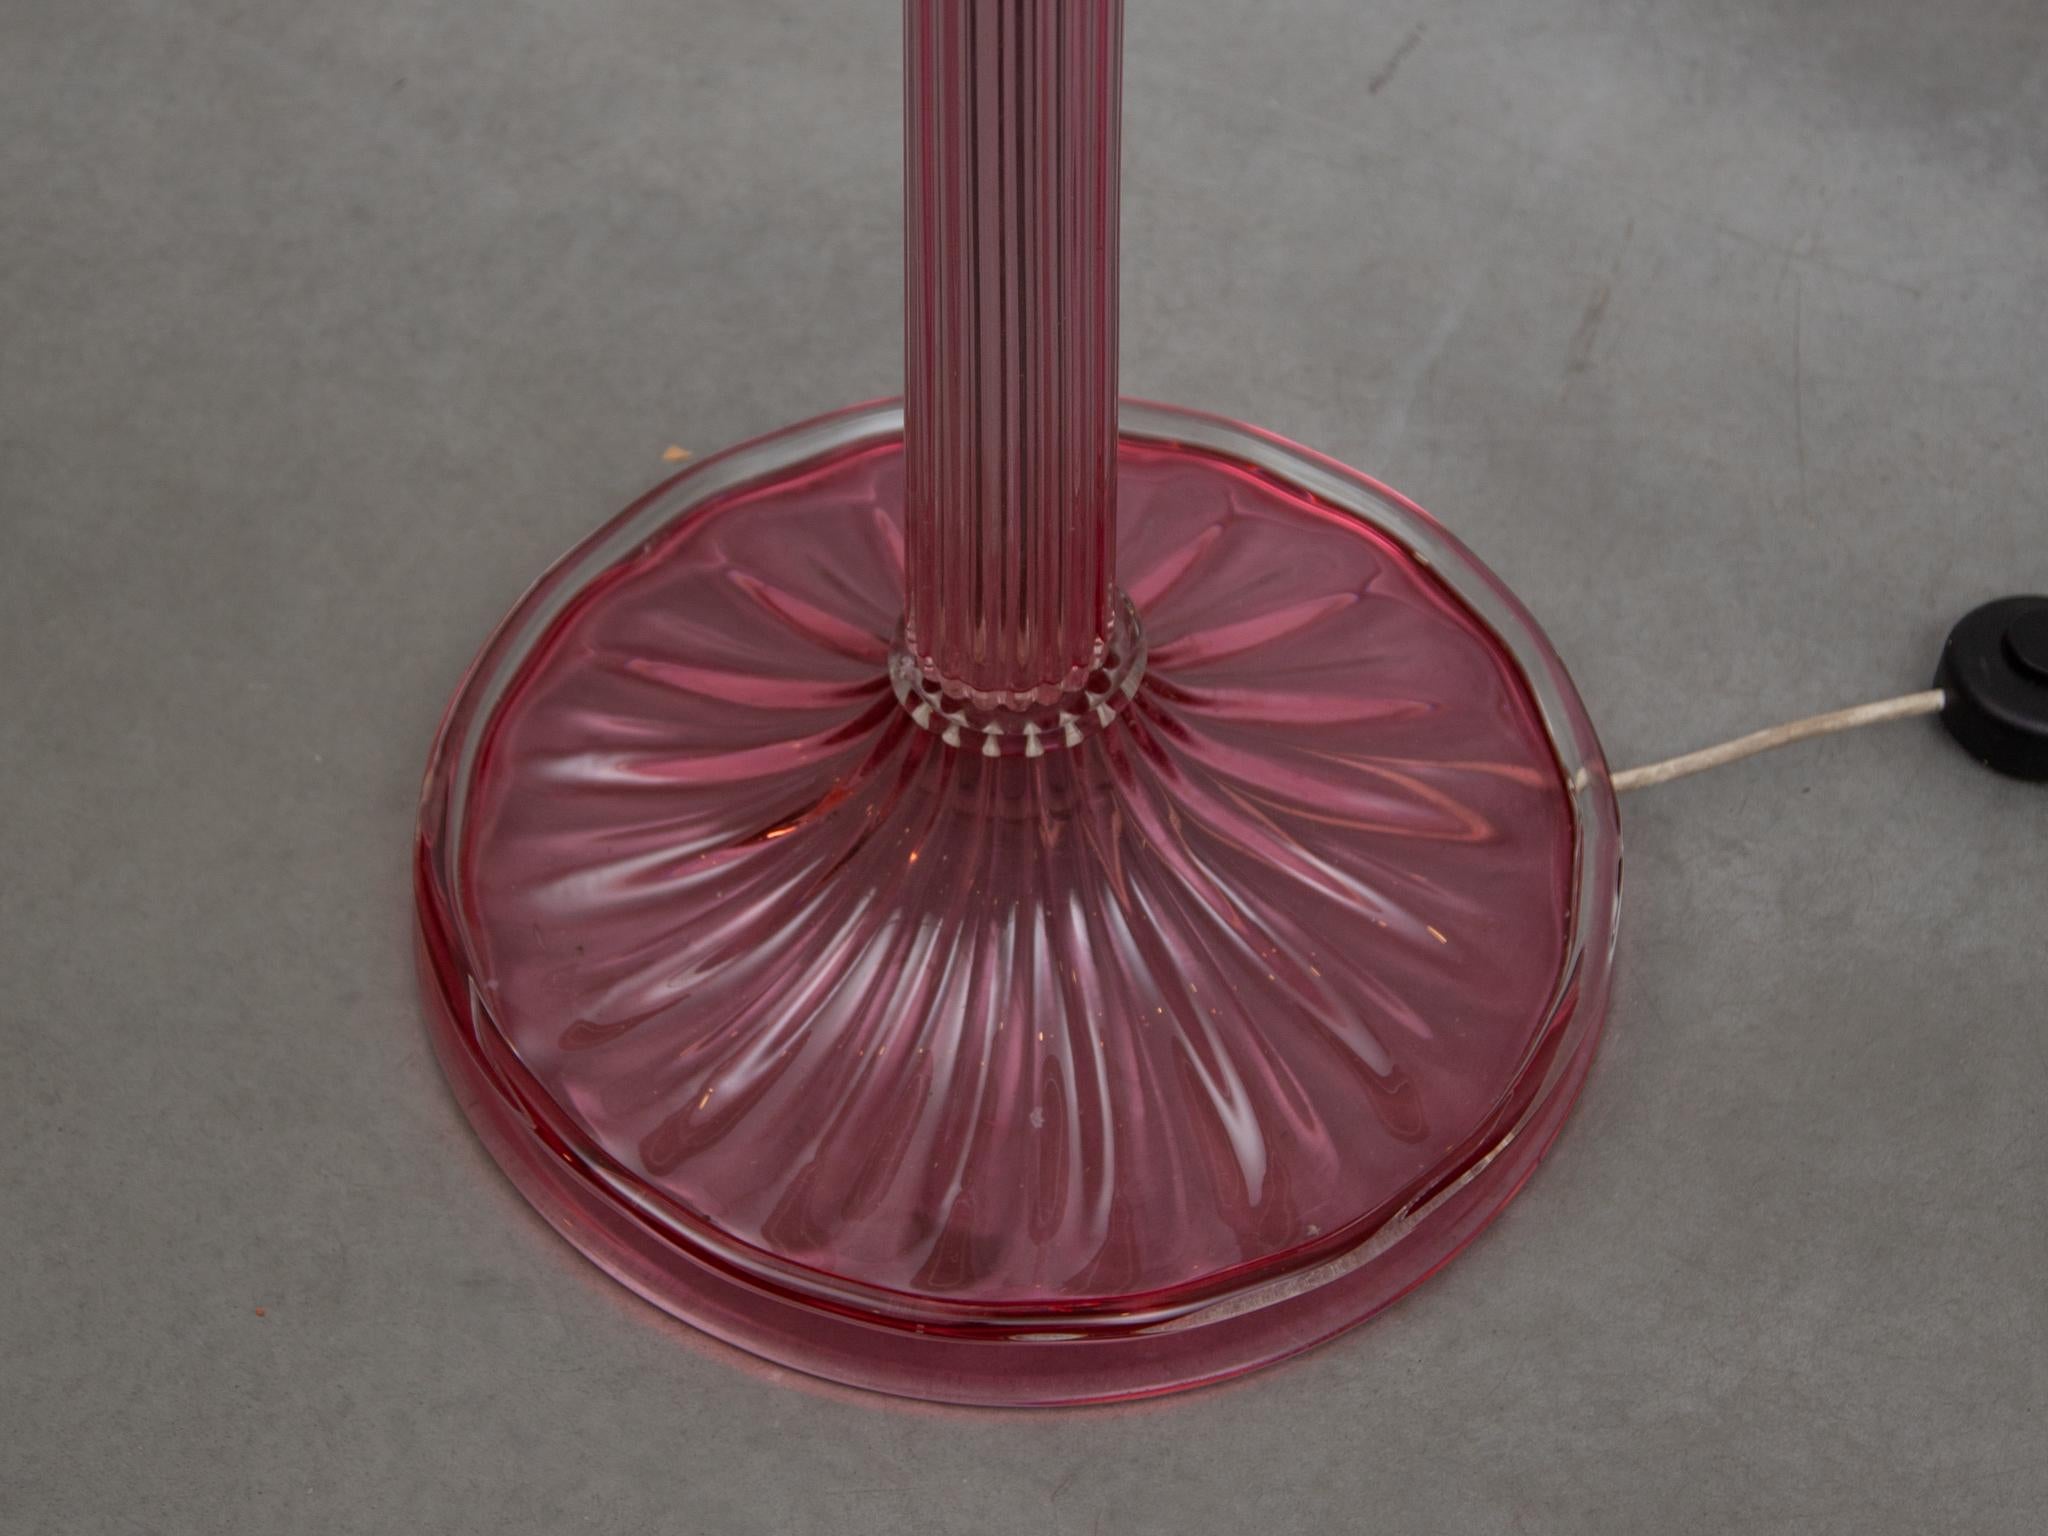 Brass Barovier e Tosso Pink Art Glass Floor Lamp, Murano Blown Glass, 1950s, Italy For Sale